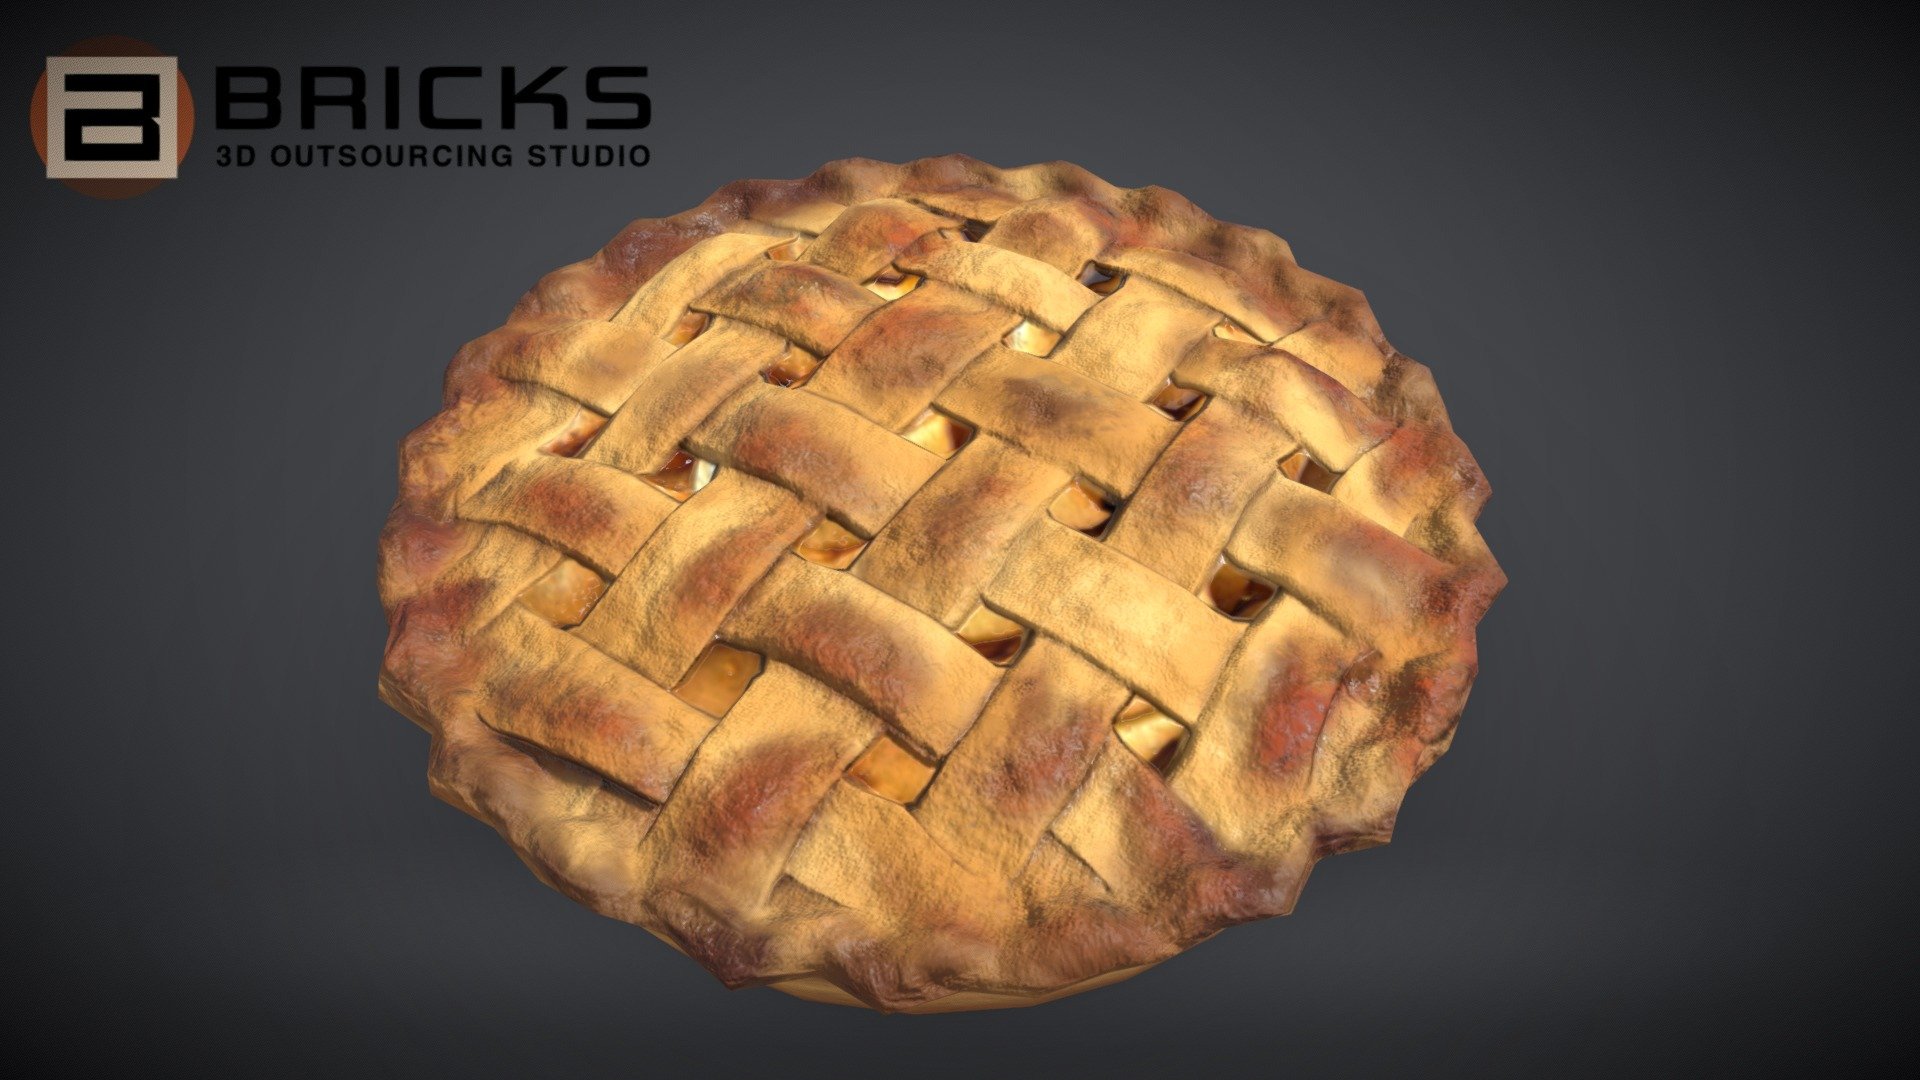 PBR Food Asset:
Apple Pie
Polycount: 1500
Vertex count: 752
Texture Size: 1024px x 1024px
Normal: OpenGL

If you need any adjust in file please contact us: team@bricks3dstudio.com

Hire us: tringuyen@bricks3dstudio.com
Here is us: https://www.bricks3dstudio.com/
        https://www.artstation.com/bricksstudio
        https://www.facebook.com/Bricks3dstudio/
        https://www.linkedin.com/in/bricks-studio-b10462252/ - Apple Pie - Buy Royalty Free 3D model by Bricks Studio (@bricks3dstudio) 3d model